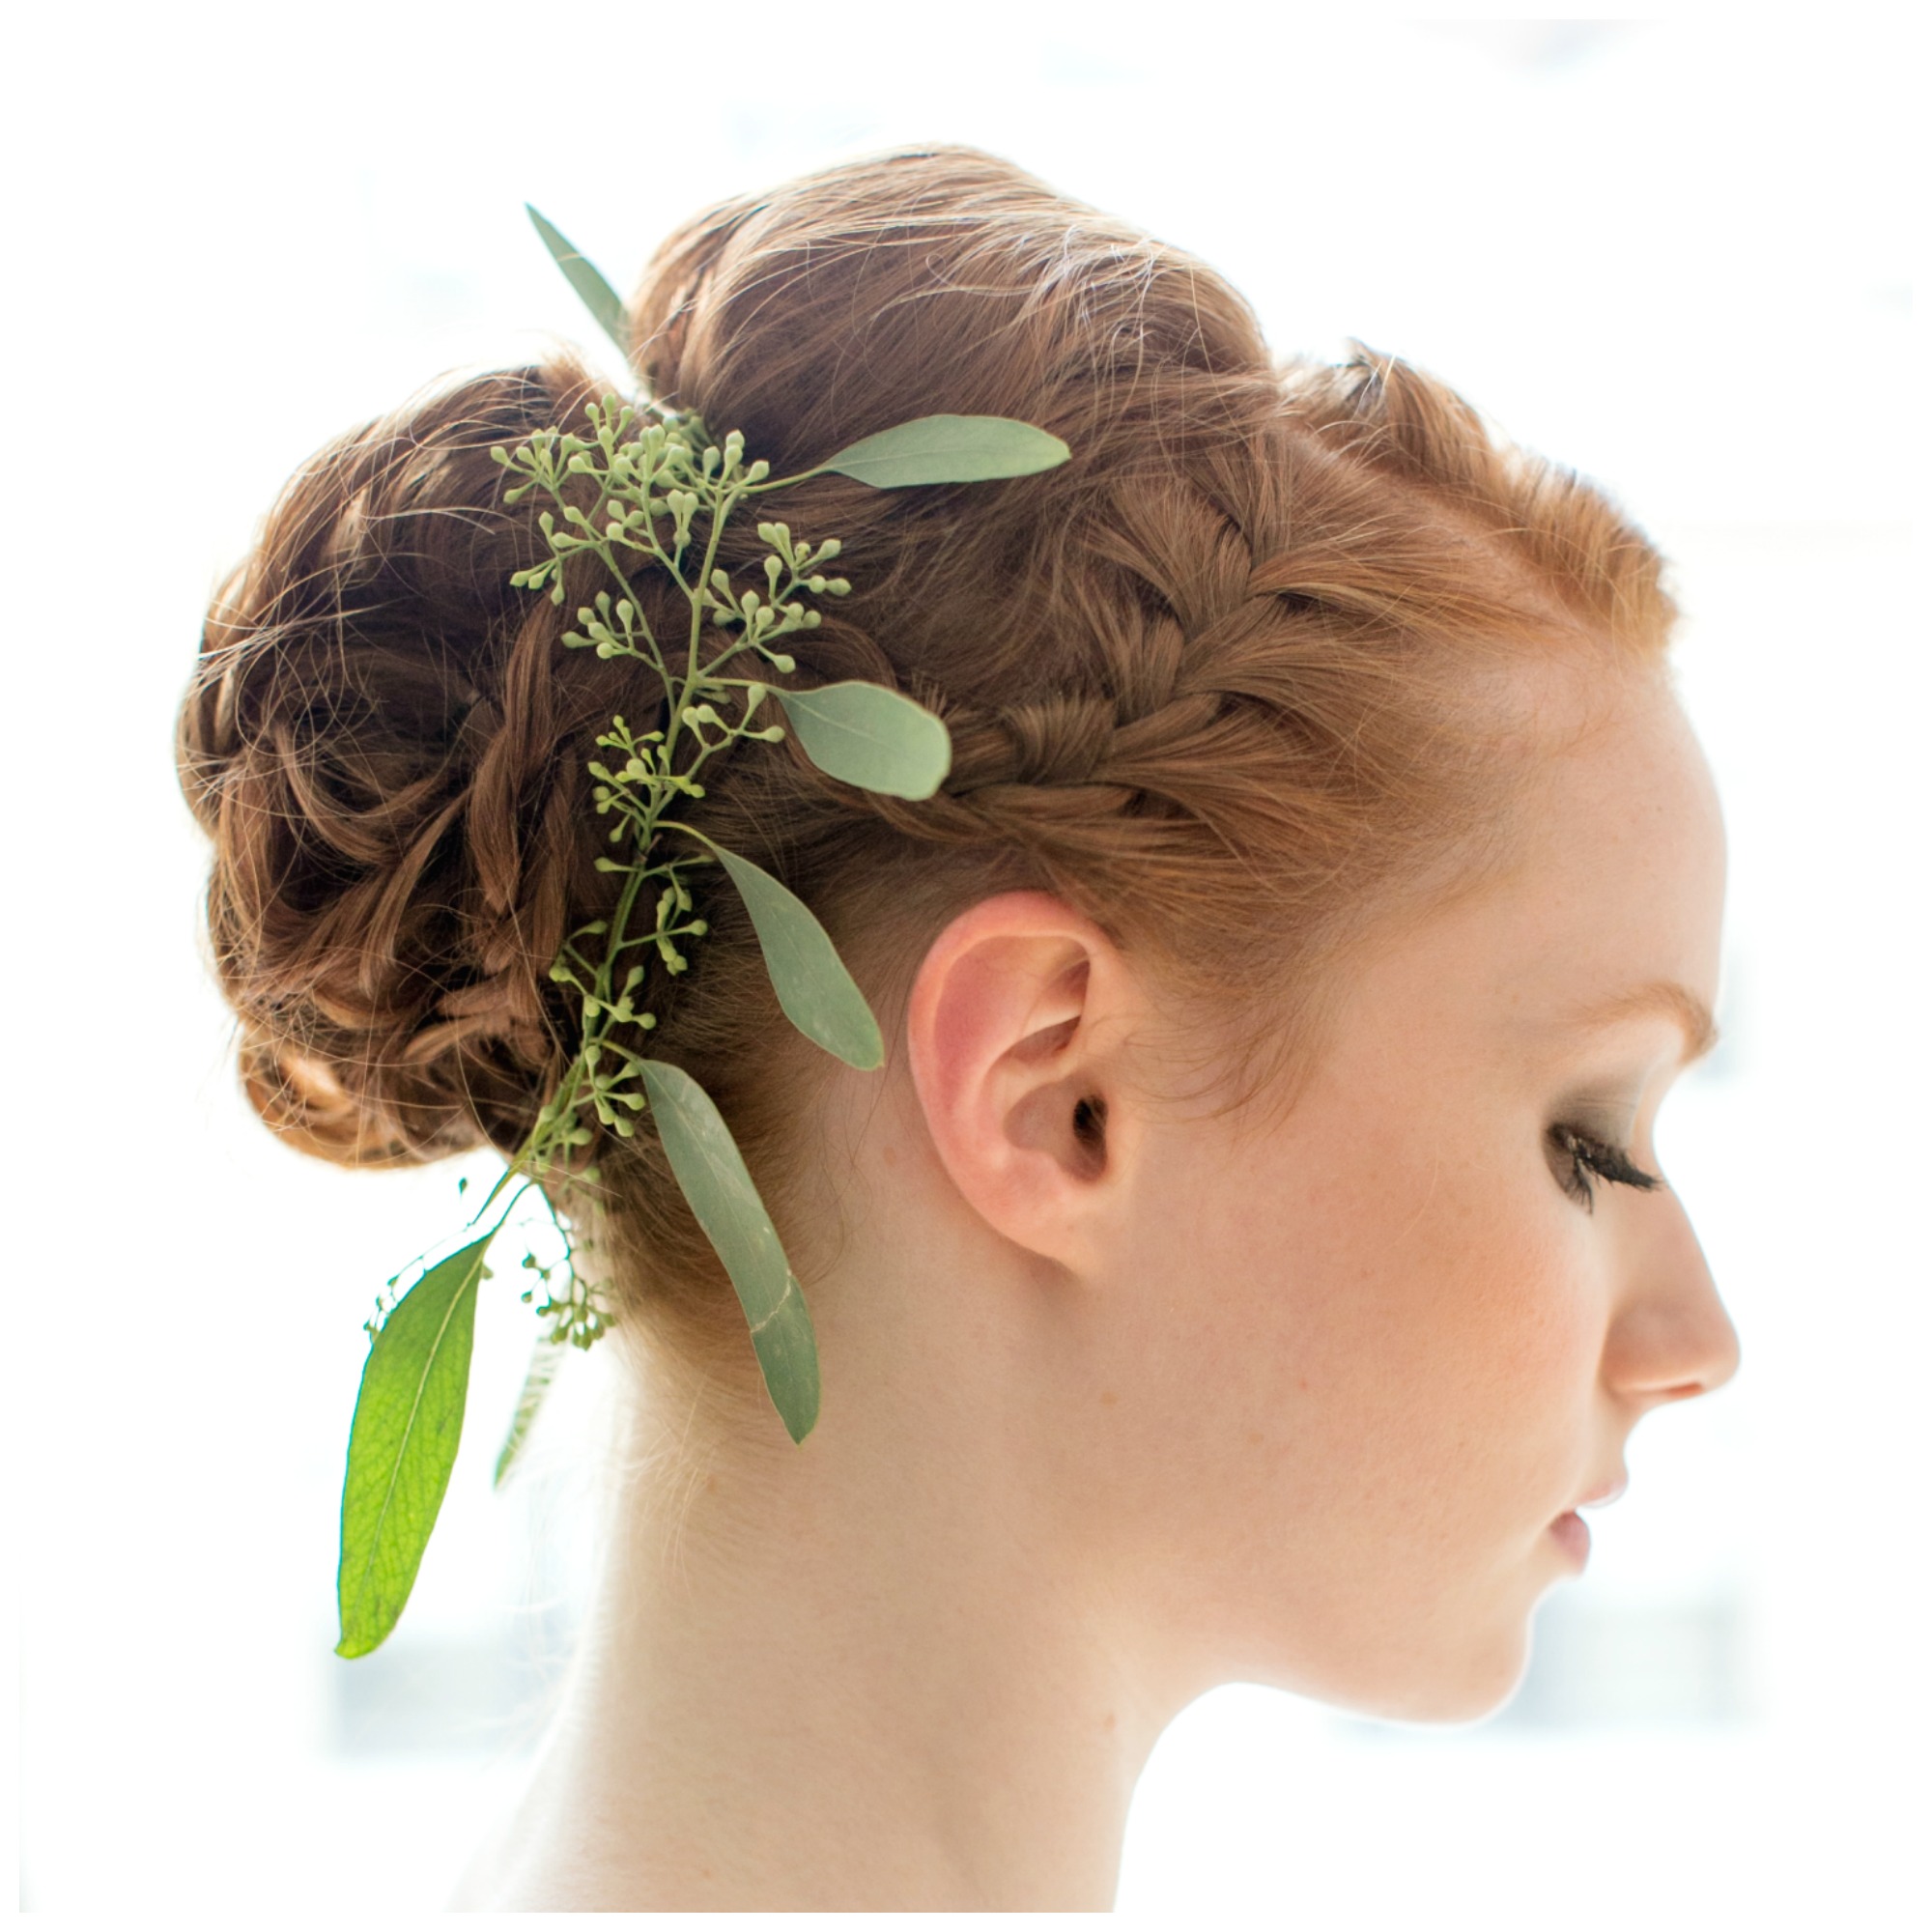 Bride with red hair knotted into braided bun, decorated with leaves